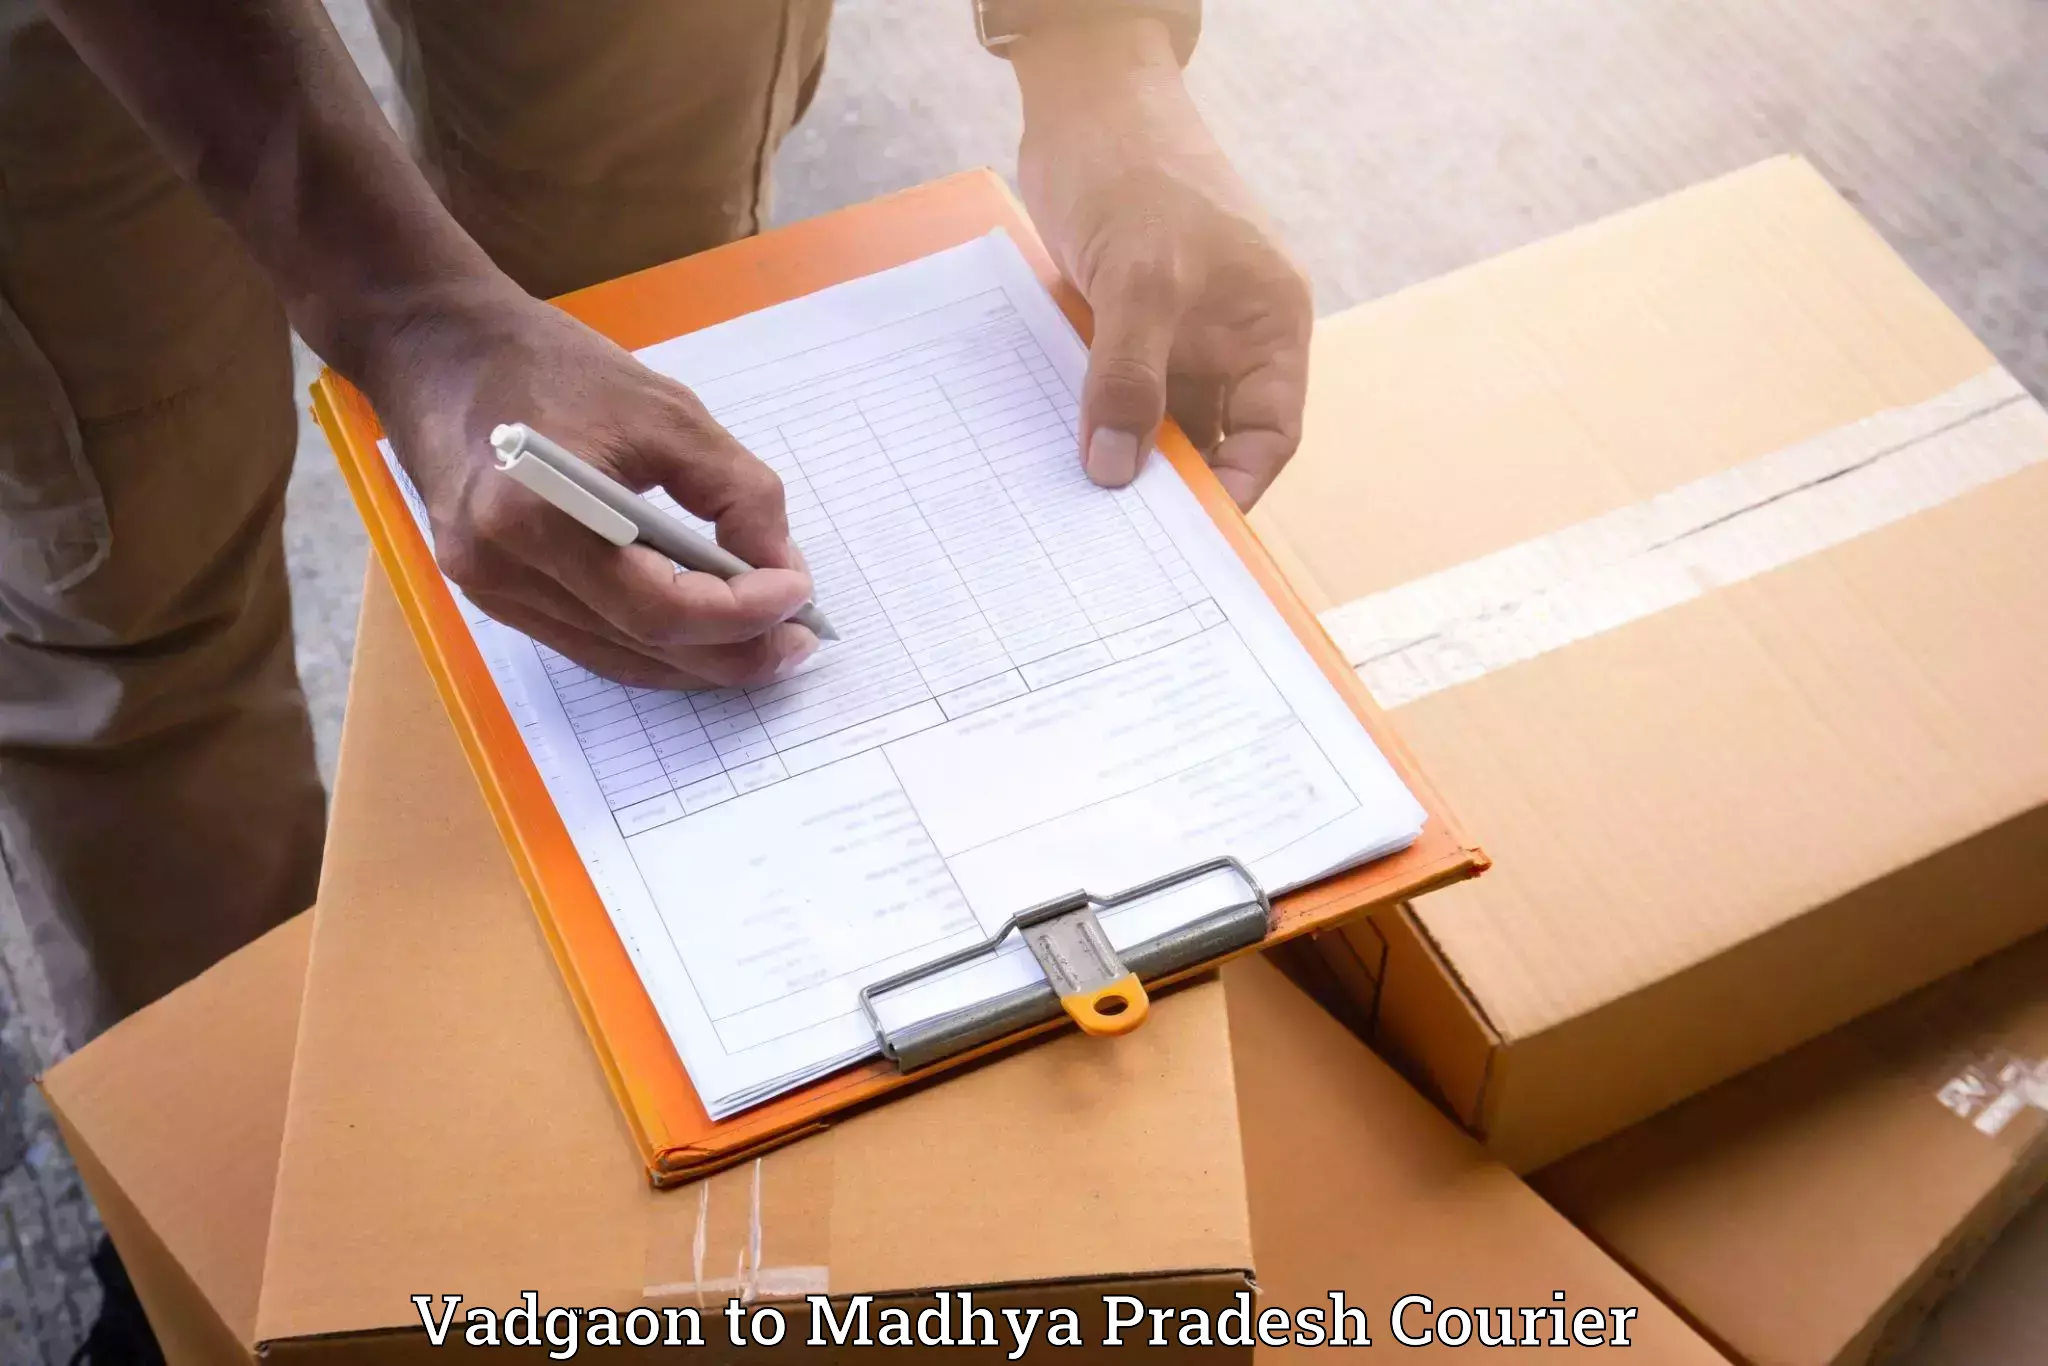 Full-service movers Vadgaon to Dewas